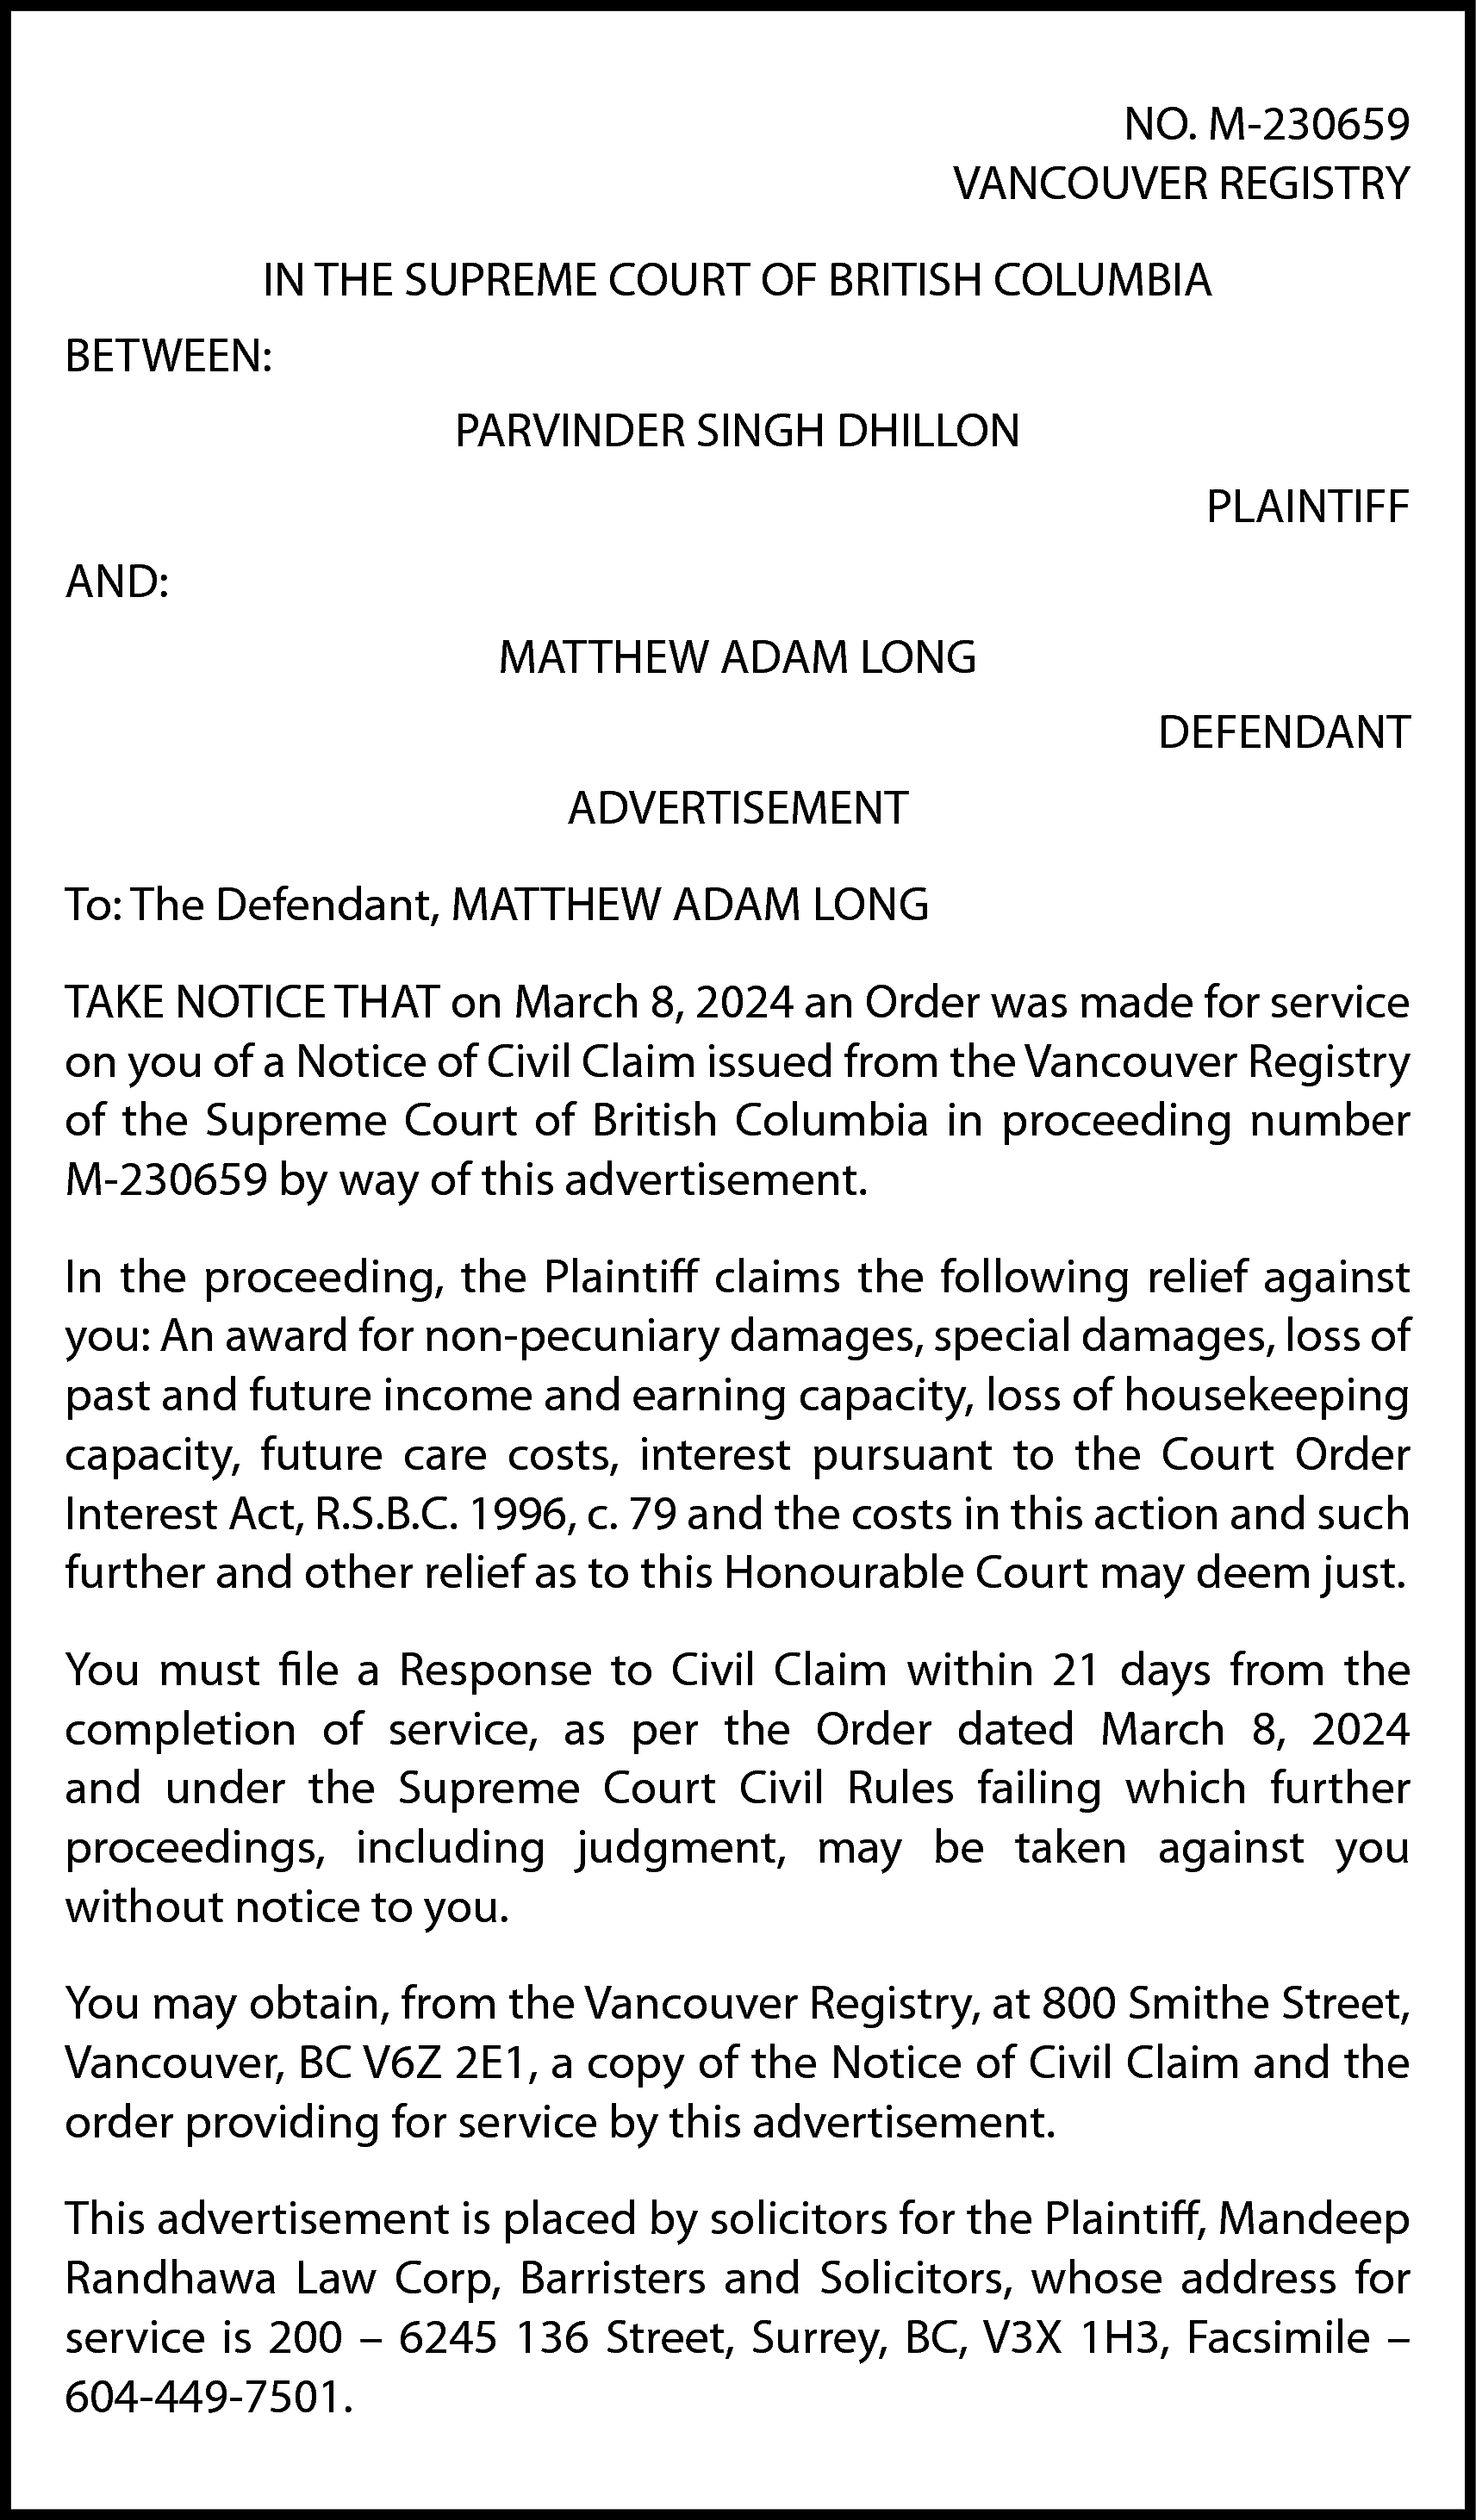 NO. M-230659 <br>VANCOUVER REGISTRY <br>IN  NO. M-230659  VANCOUVER REGISTRY  IN THE SUPREME COURT OF BRITISH COLUMBIA  BETWEEN:  PARVINDER SINGH DHILLON  PLAINTIFF  AND:  MATTHEW ADAM LONG  DEFENDANT  ADVERTISEMENT  To: The Defendant, MATTHEW ADAM LONG  TAKE NOTICE THAT on March 8, 2024 an Order was made for service  on you of a Notice of Civil Claim issued from the Vancouver Registry  of the Supreme Court of British Columbia in proceeding number  M-230659 by way of this advertisement.  In the proceeding, the Plaintiff claims the following relief against  you: An award for non-pecuniary damages, special damages, loss of  past and future income and earning capacity, loss of housekeeping  capacity, future care costs, interest pursuant to the Court Order  Interest Act, R.S.B.C. 1996, c. 79 and the costs in this action and such  further and other relief as to this Honourable Court may deem just.  You must file a Response to Civil Claim within 21 days from the  completion of service, as per the Order dated March 8, 2024  and under the Supreme Court Civil Rules failing which further  proceedings, including judgment, may be taken against you  without notice to you.  You may obtain, from the Vancouver Registry, at 800 Smithe Street,  Vancouver, BC V6Z 2E1, a copy of the Notice of Civil Claim and the  order providing for service by this advertisement.  This advertisement is placed by solicitors for the Plaintiff, Mandeep  Randhawa Law Corp, Barristers and Solicitors, whose address for  service is 200 – 6245 136 Street, Surrey, BC, V3X 1H3, Facsimile –  604-449-7501.    